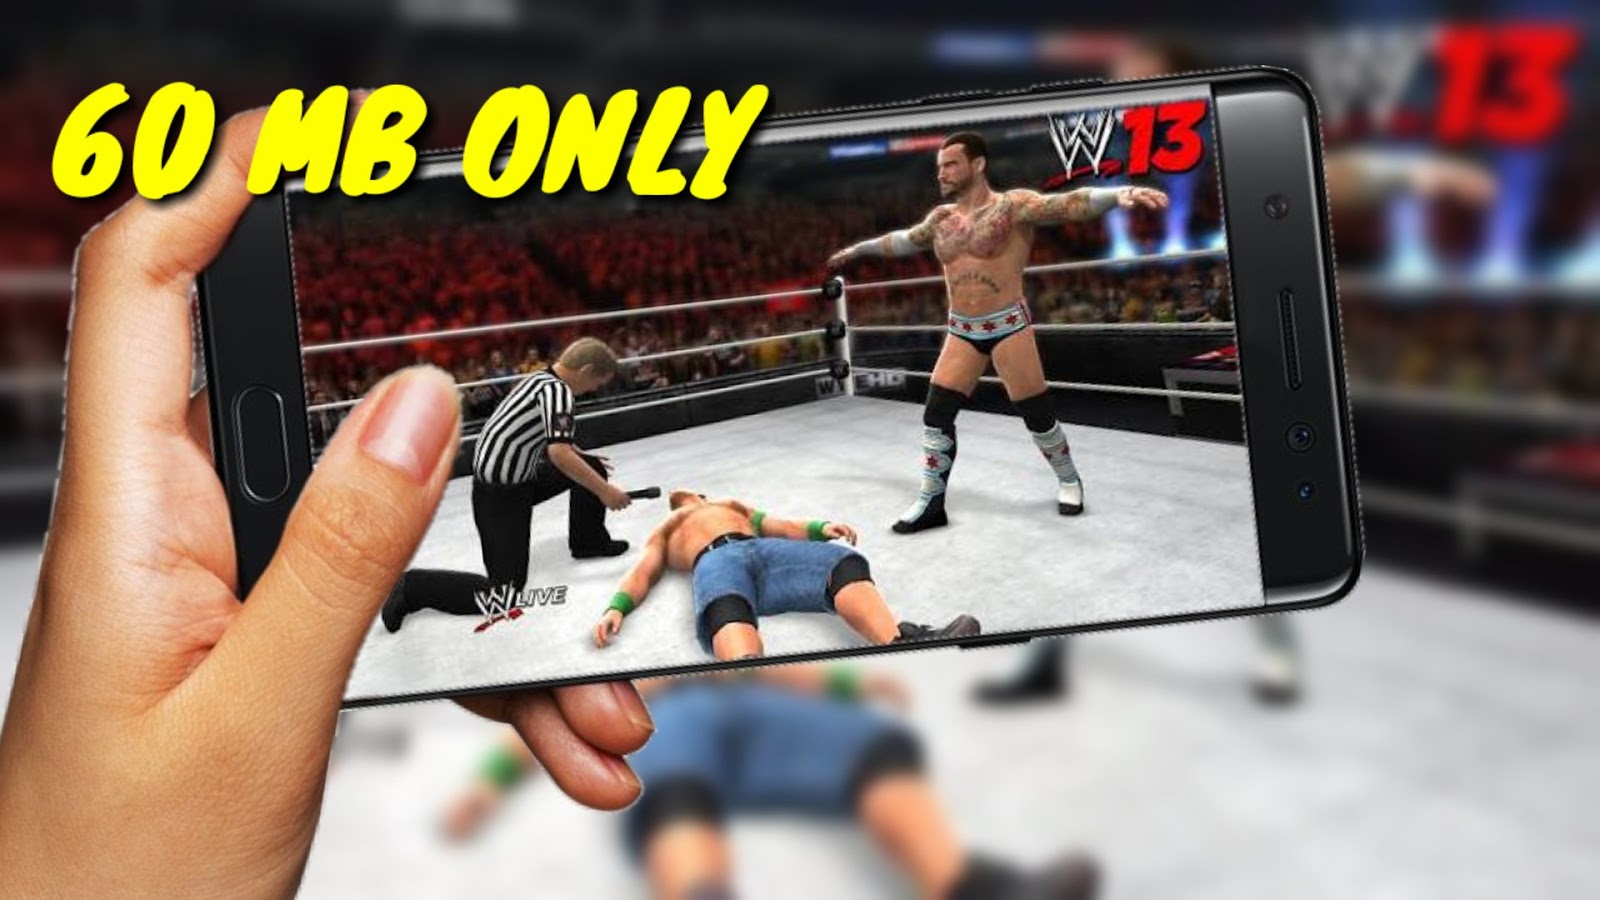 wwe 2k13 pc game free download full version highly compressed